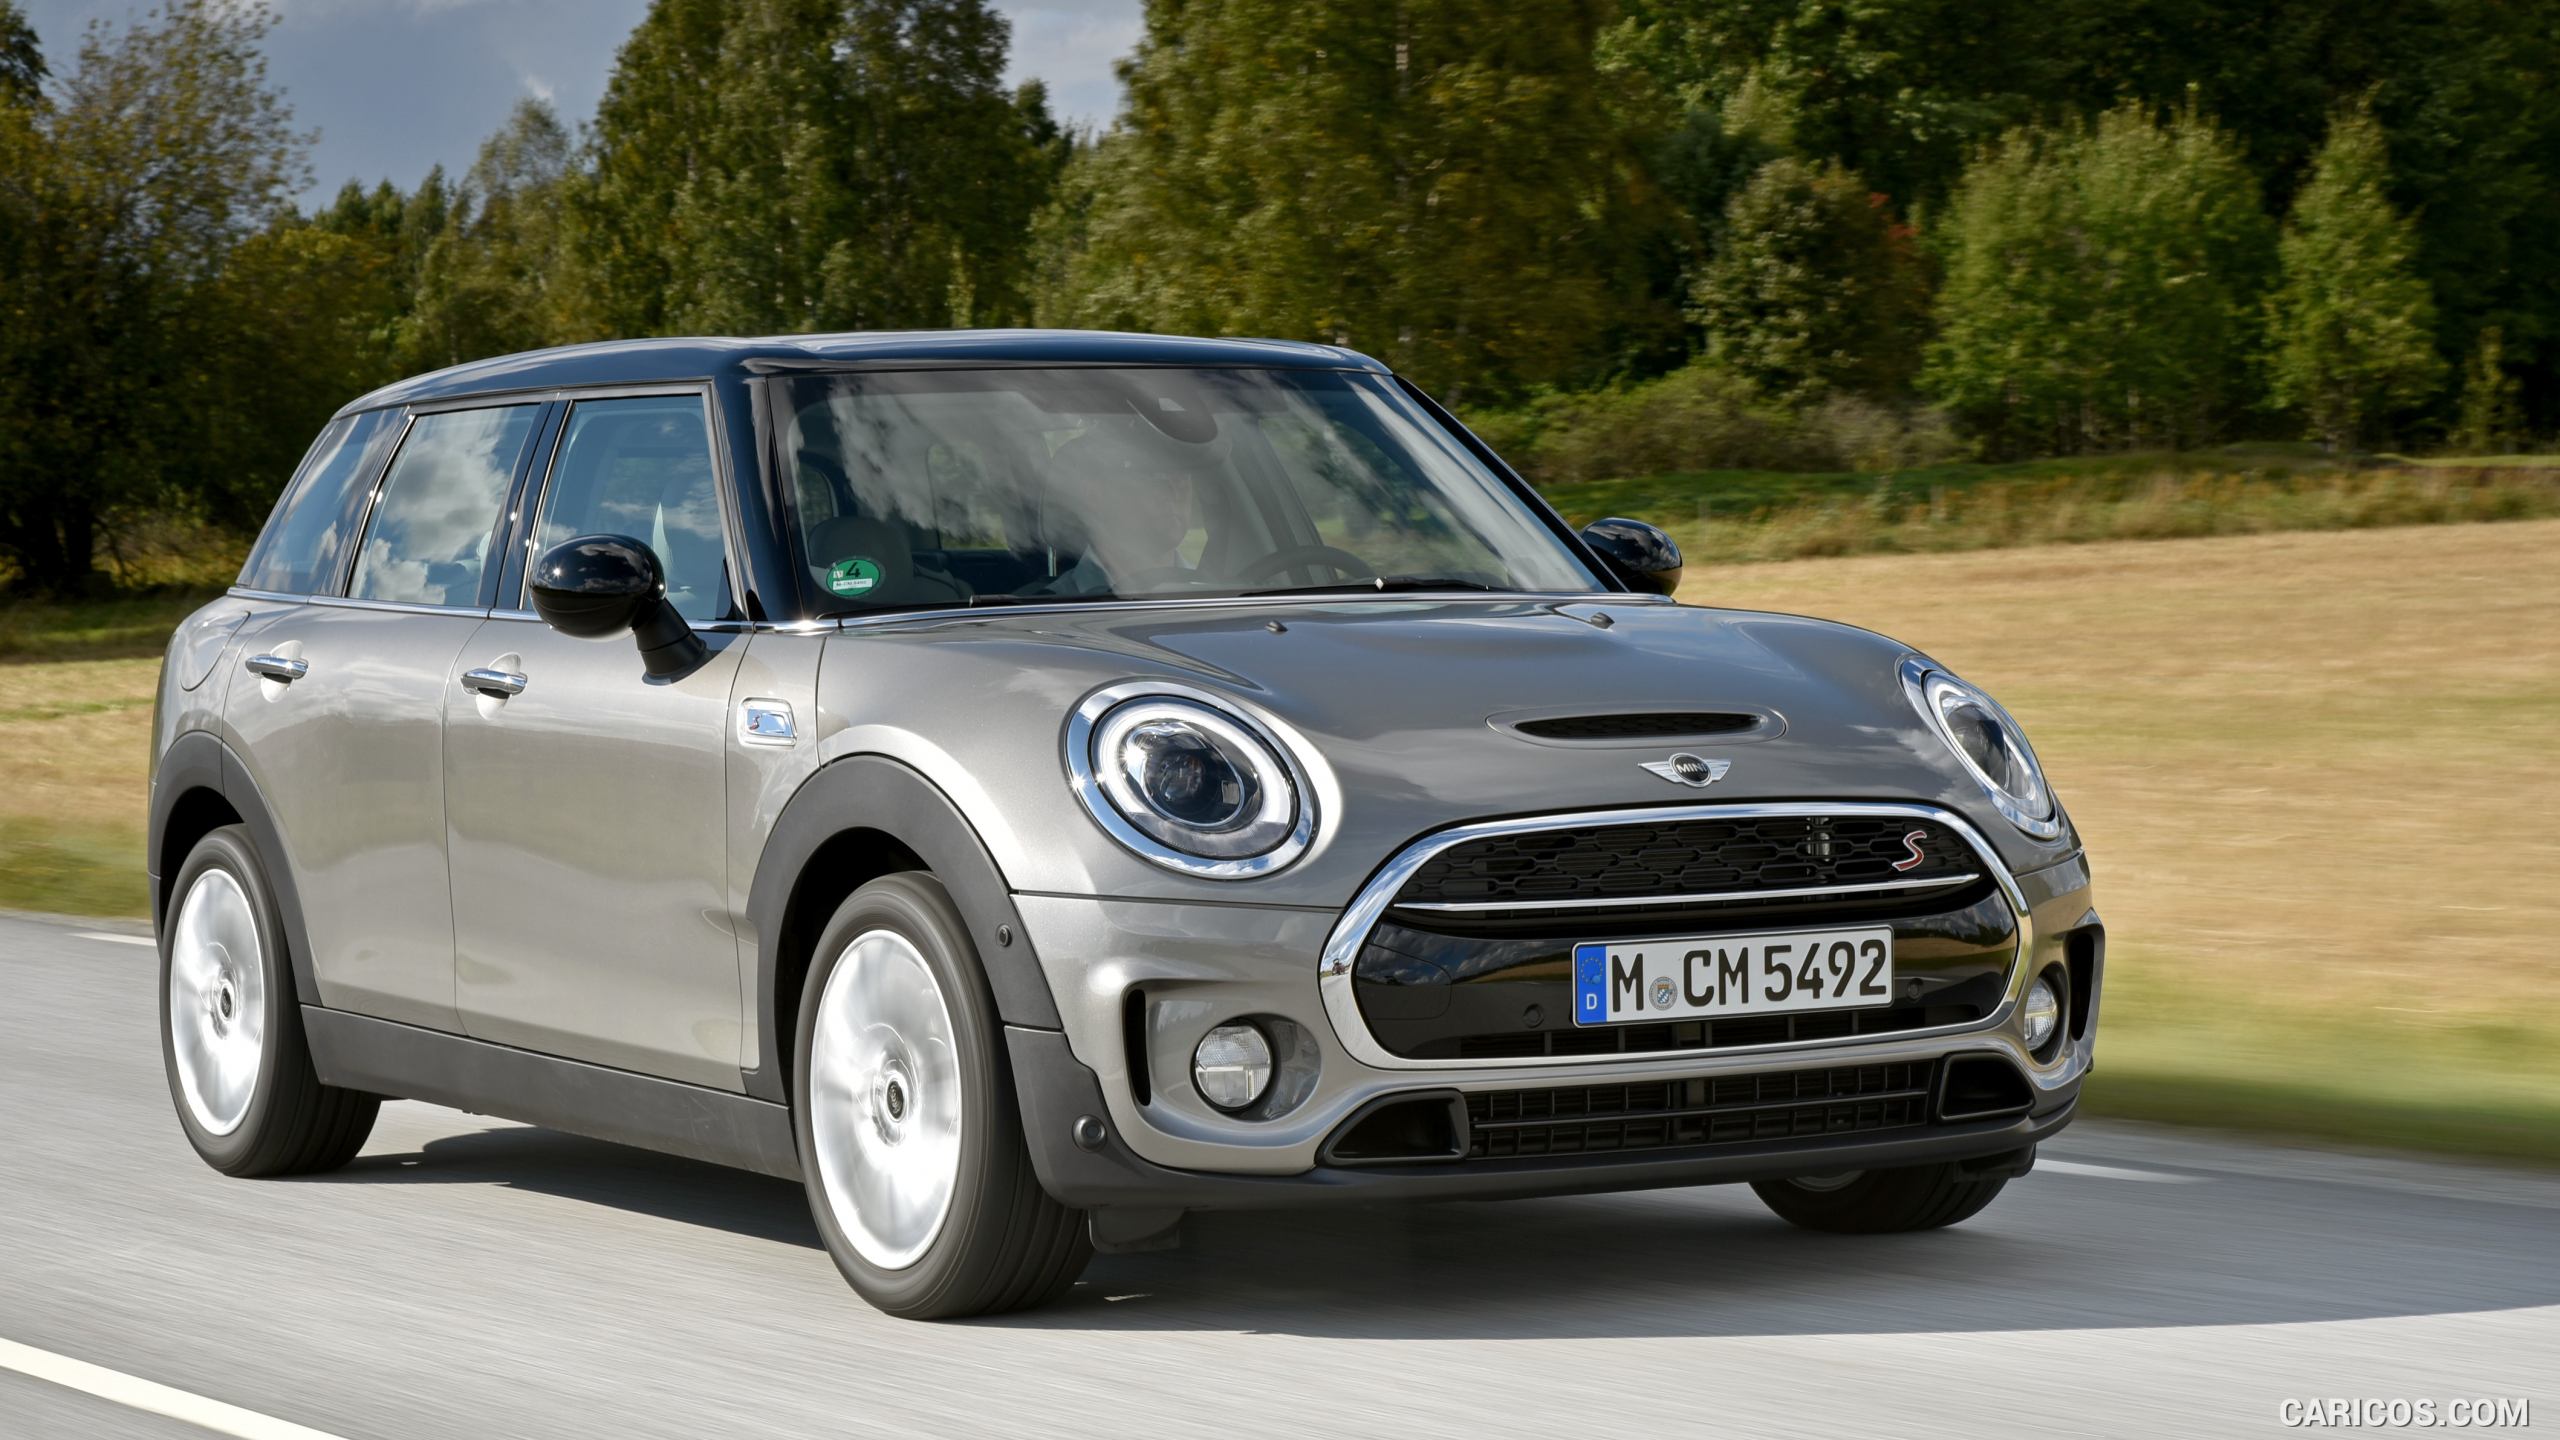 2016 MINI Cooper S Clubman in Metallic Melting Silver - Front, #122 of 380